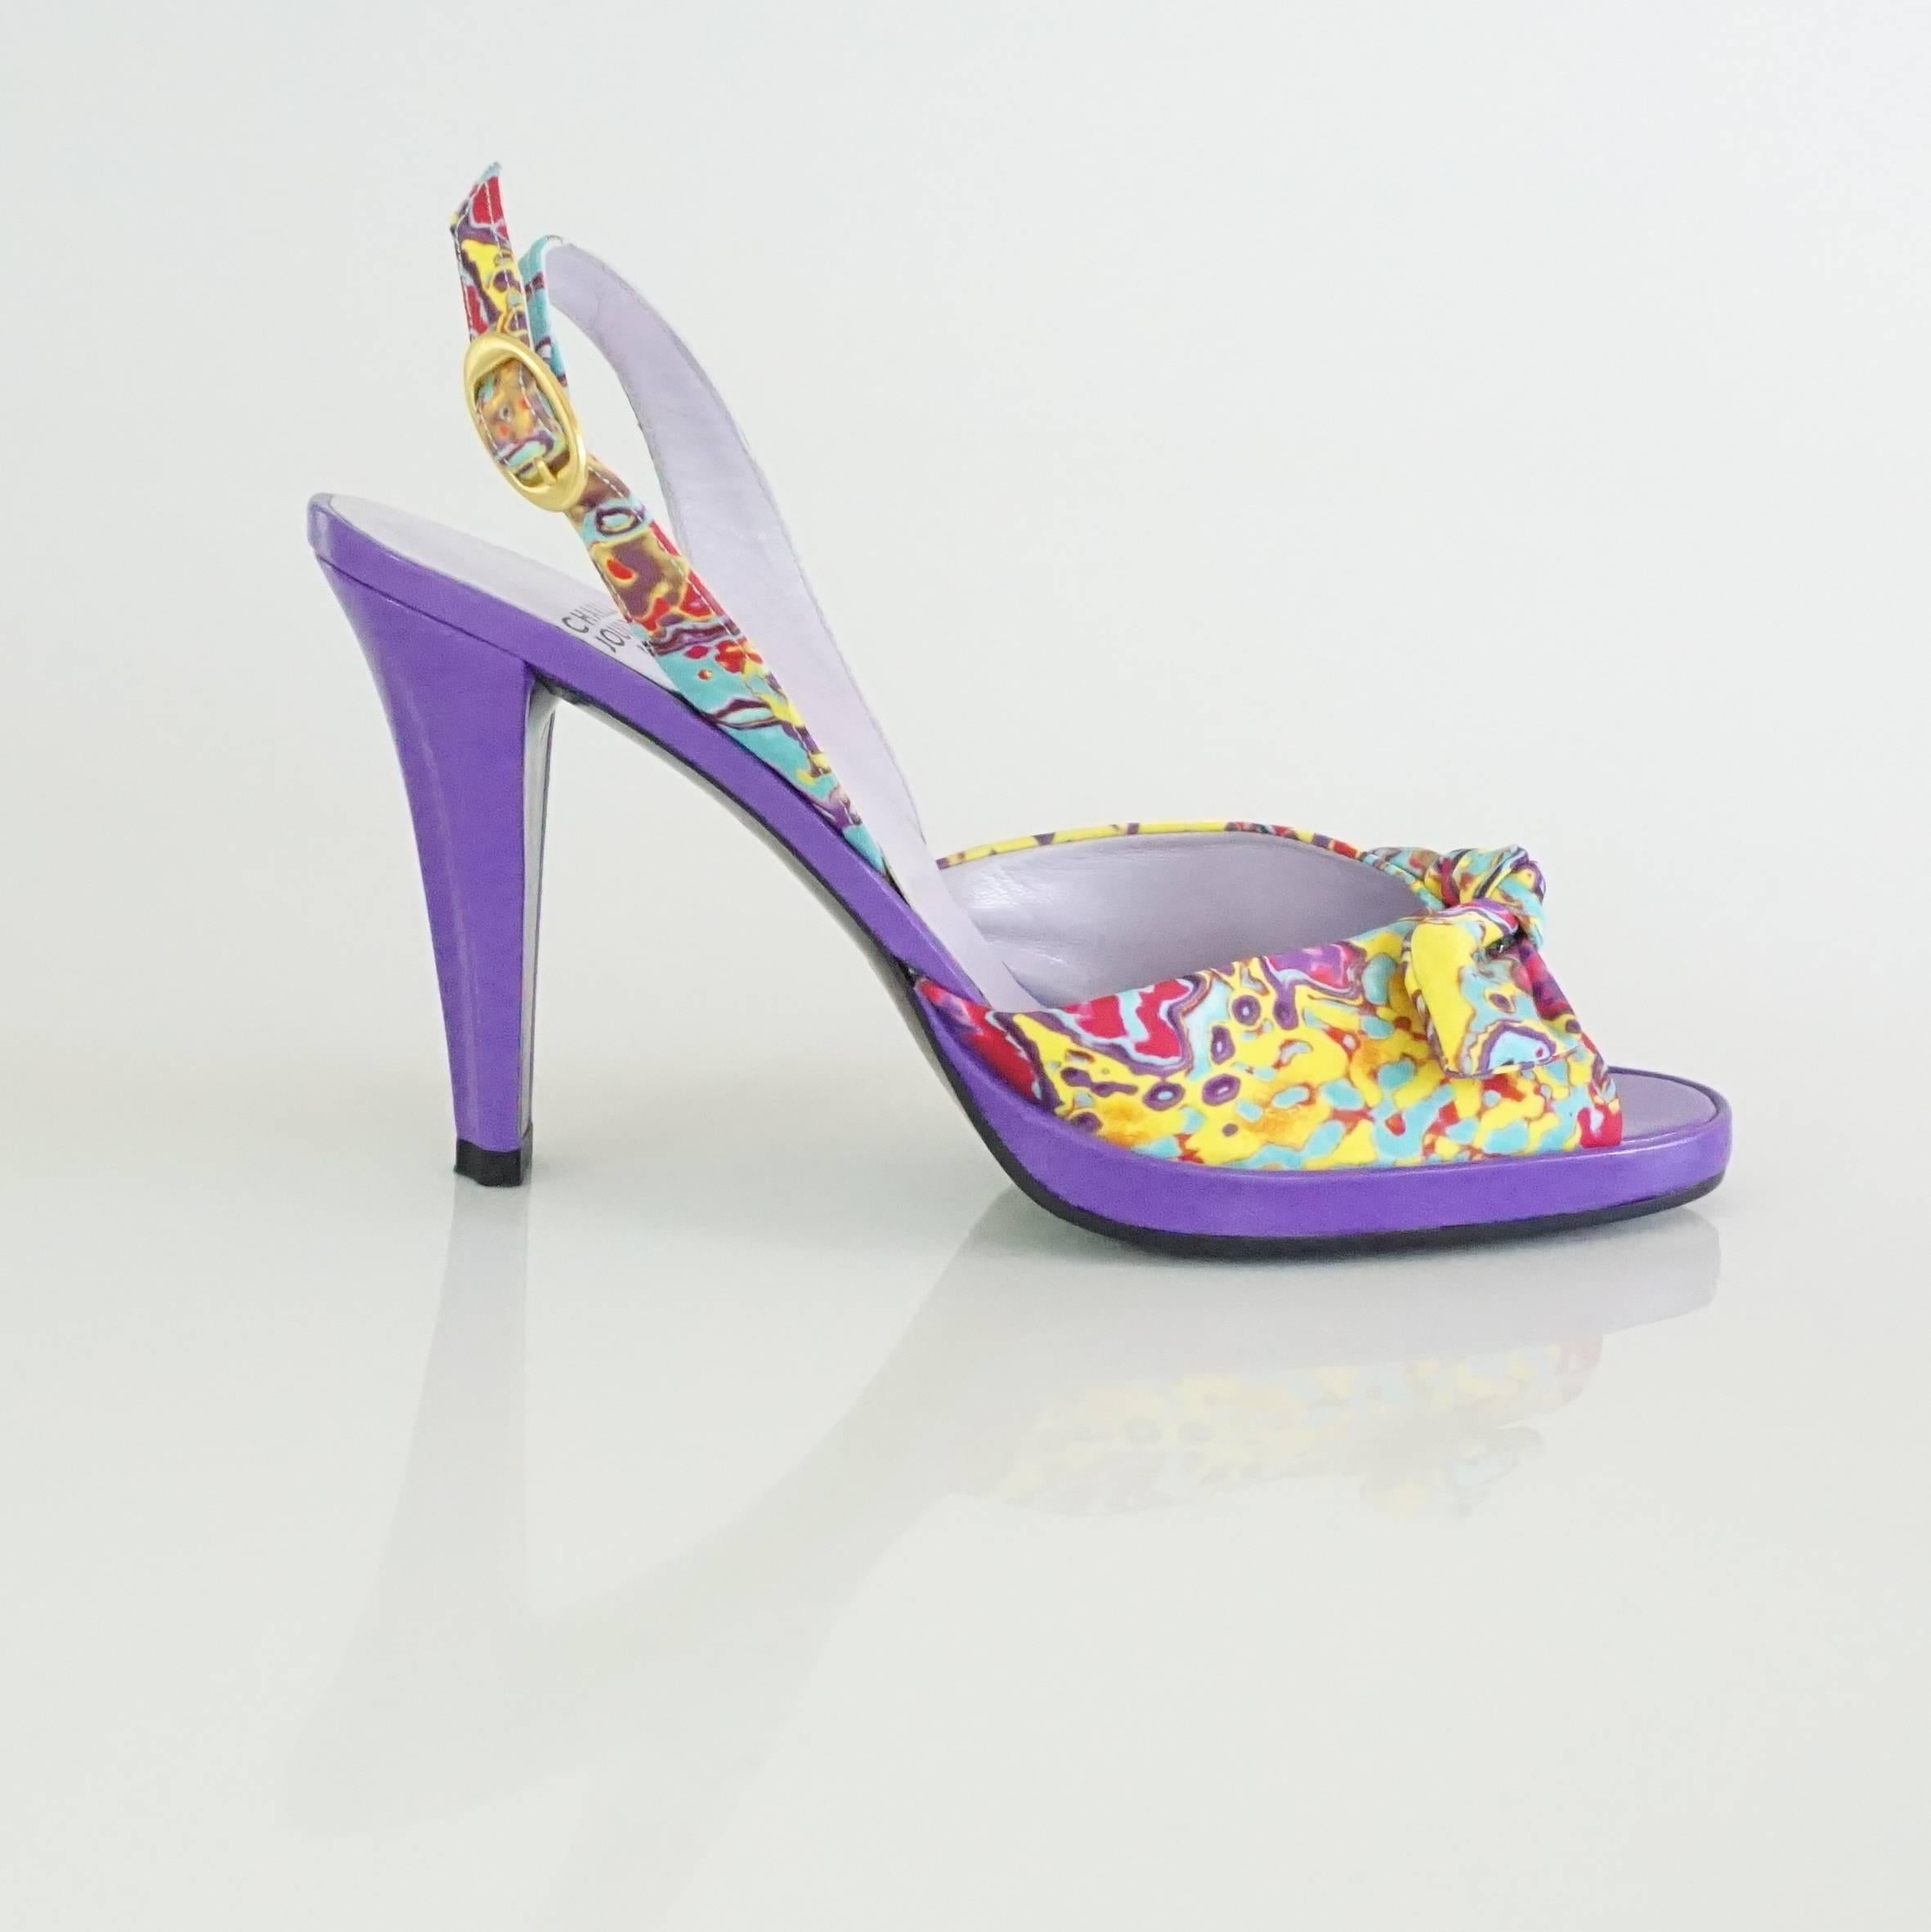 Charles Jourdan Purple & Multi Platform Slingbacks - 8.5. These open toe heels have an very unique and playful look. They feature an abstract multicolor print with purple, yellow, pink, and blue, purple leather, gold buckle on the strap, and a front